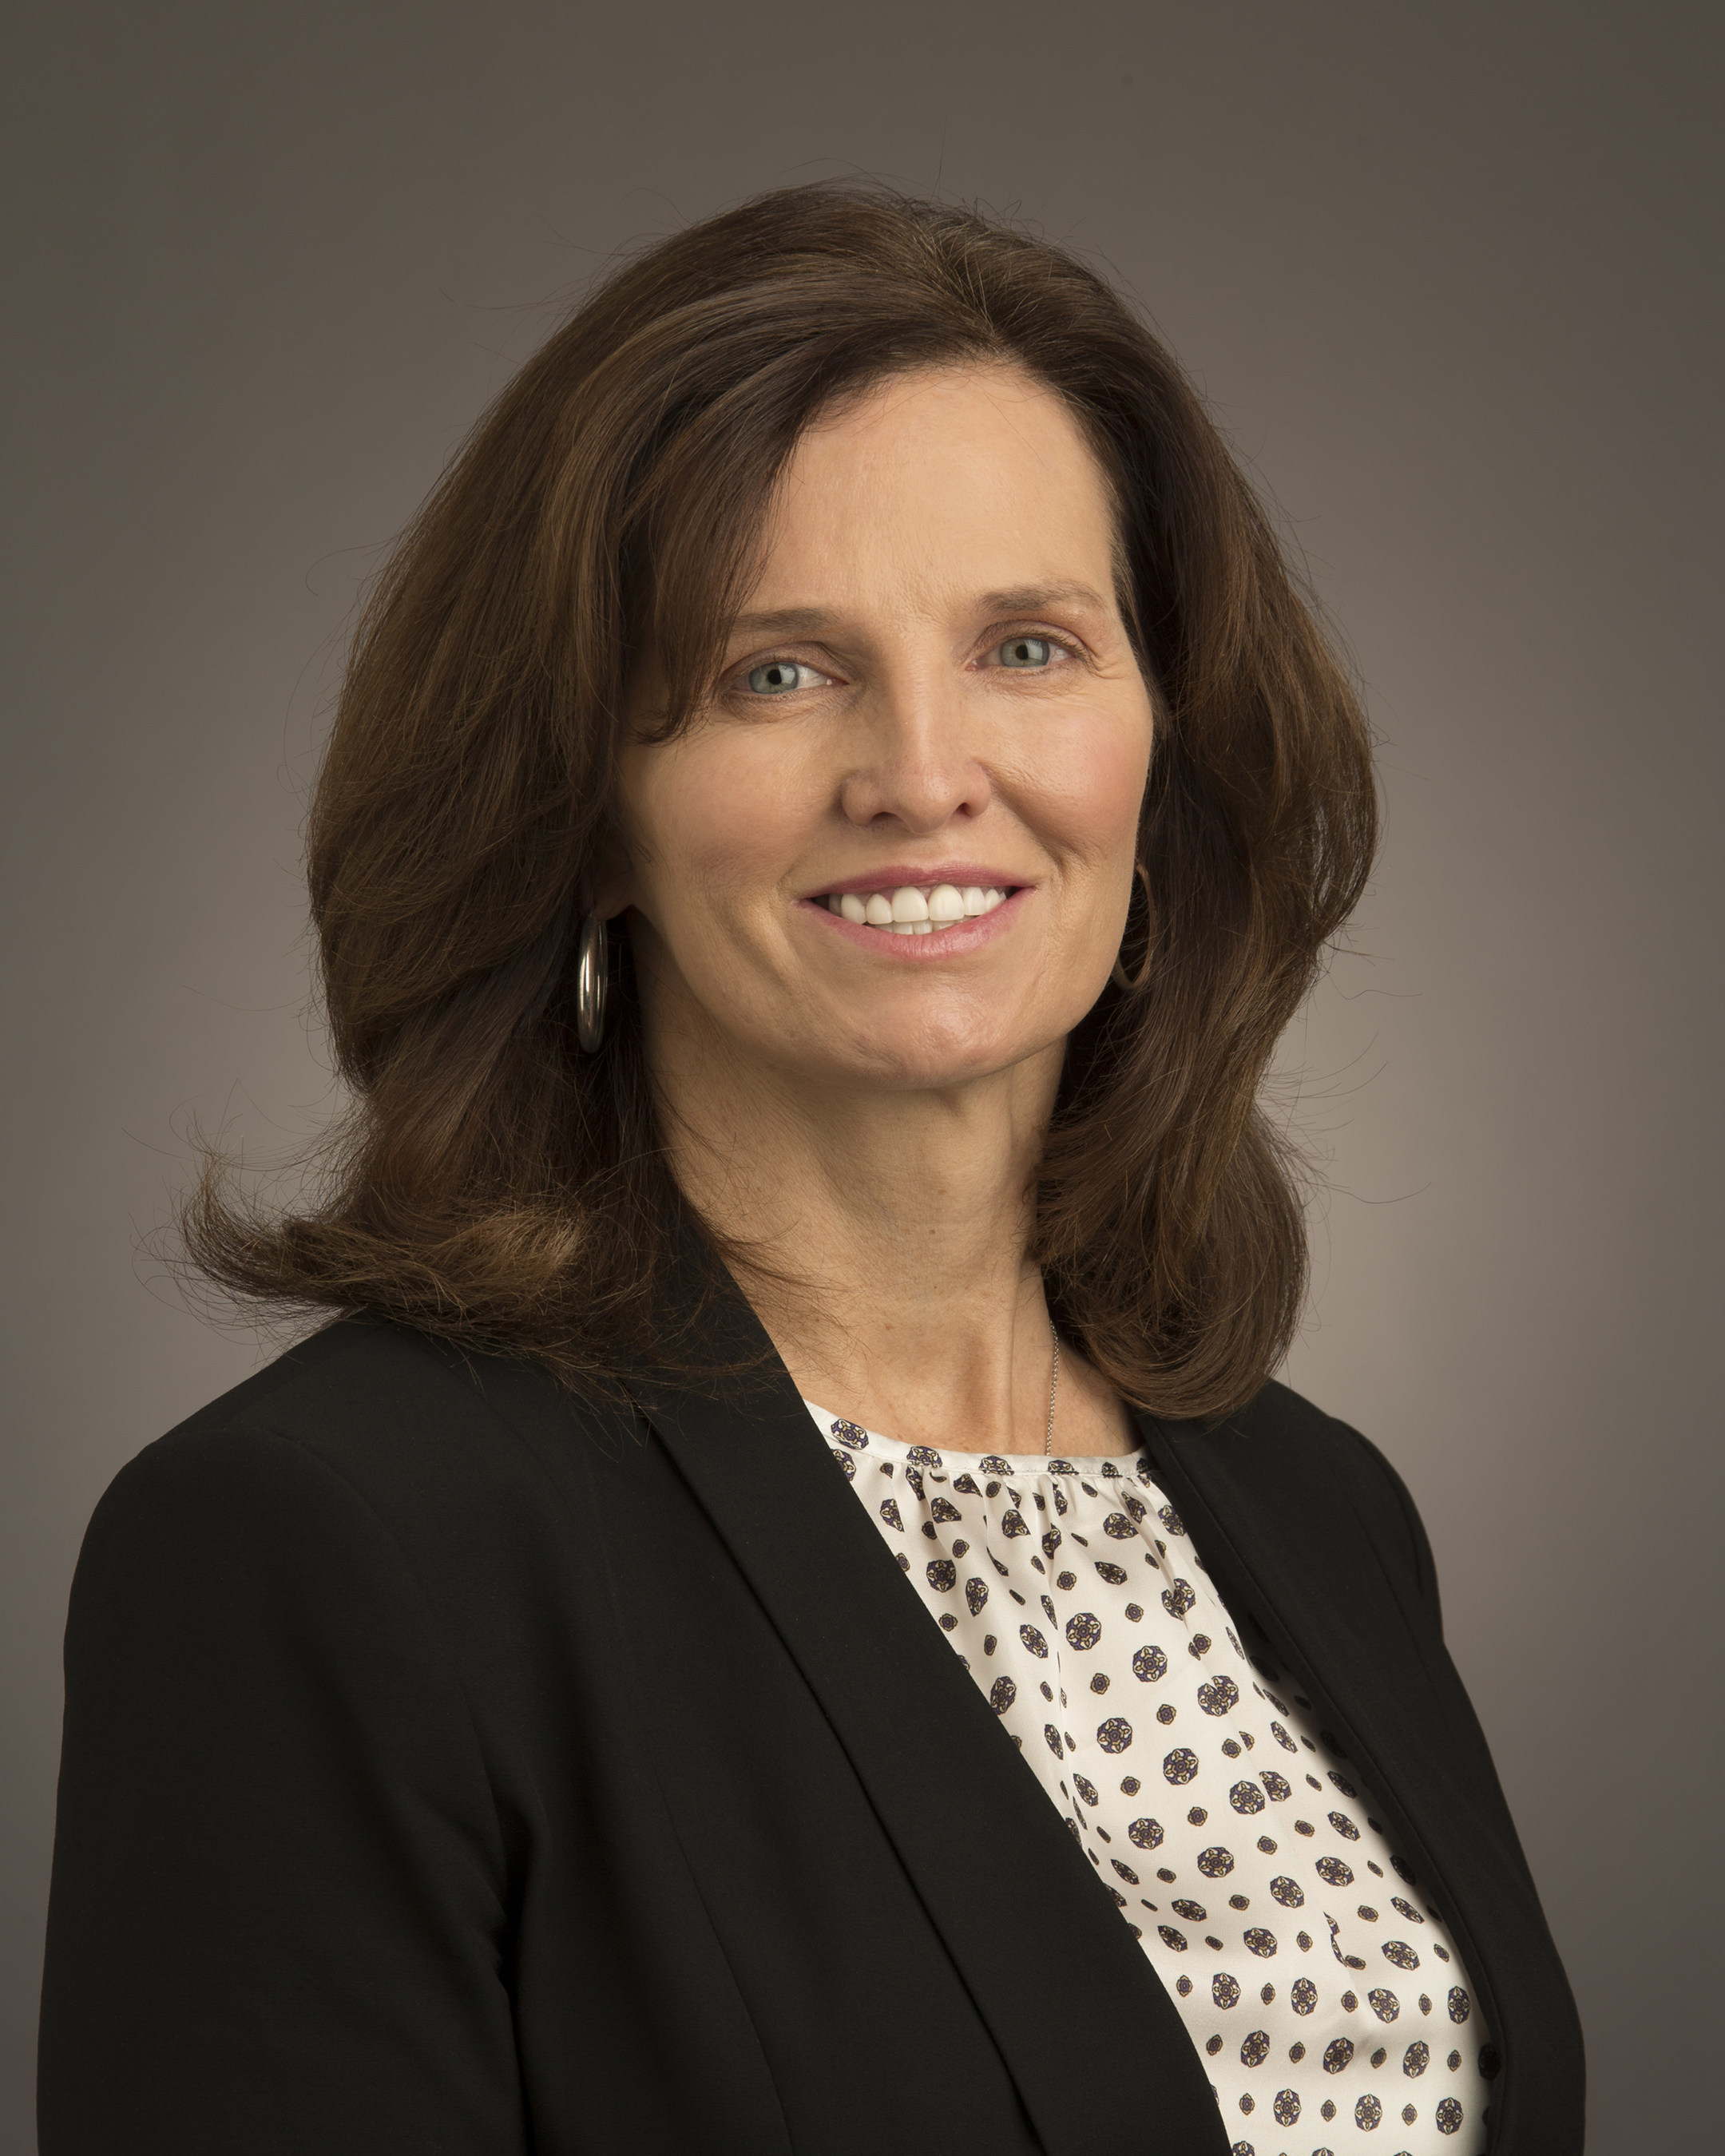 Jean Savage, vice president with responsibility for the Advanced Component & System Division, will lead Caterpillar Inc.'s new research, technology and product development division.